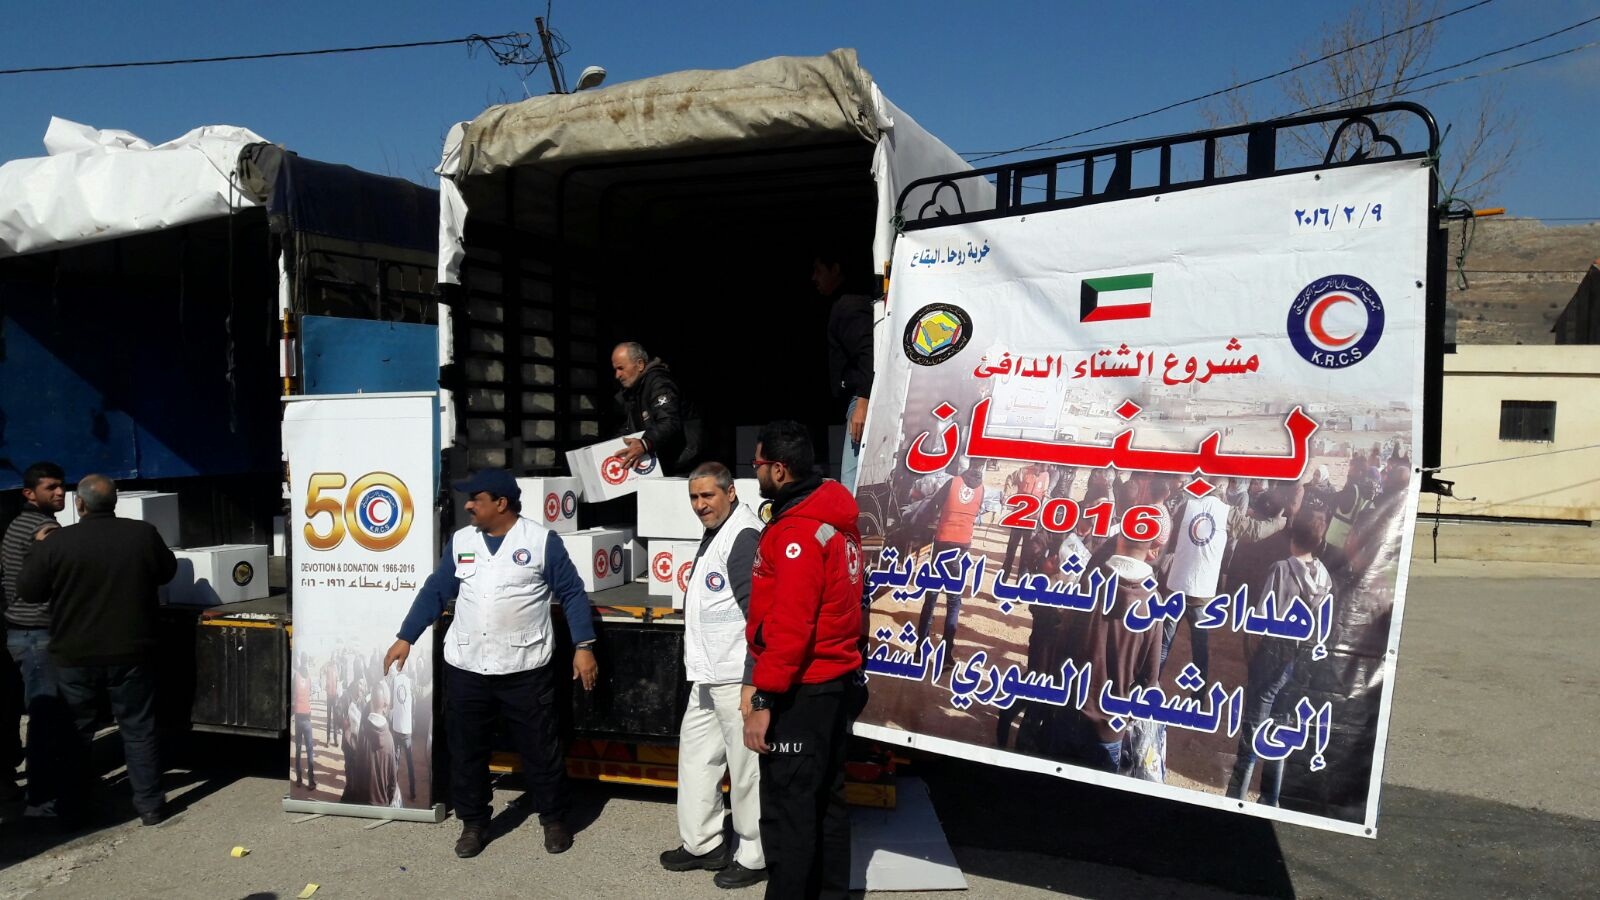 KRCS continues aid campaign to needy Syrian families in Lebanon